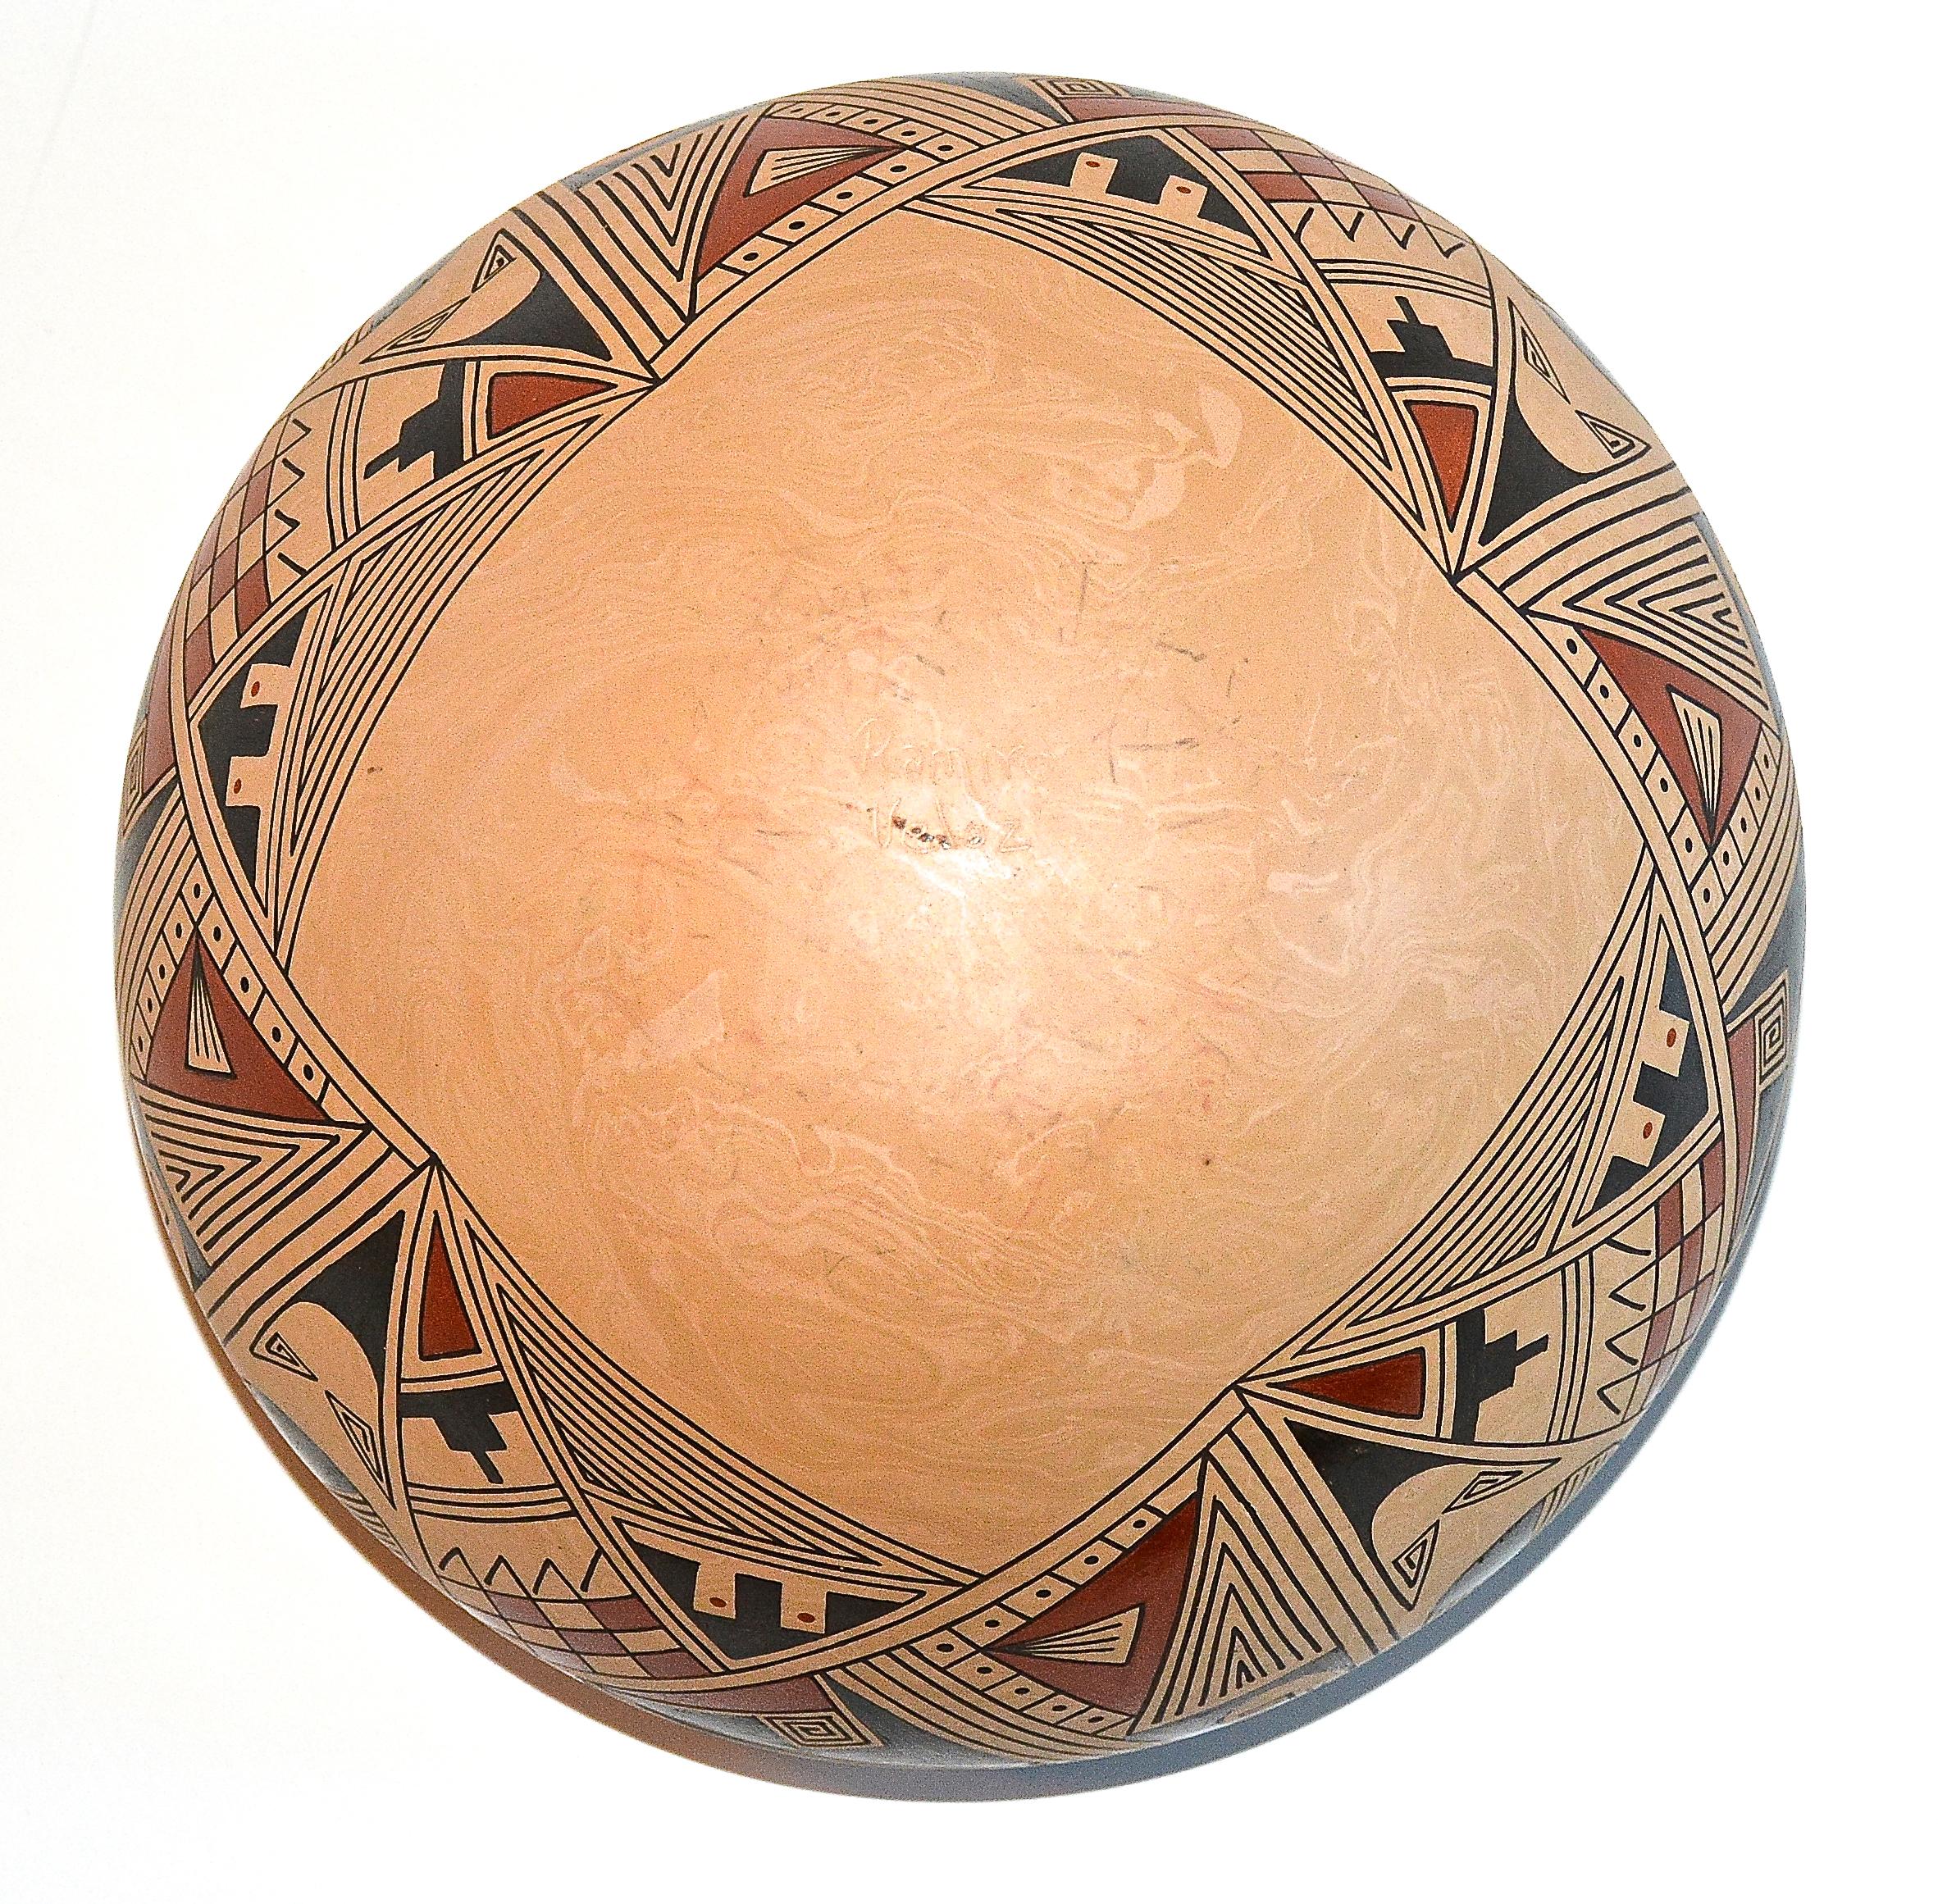 Mata Ortiz Polychrome Pot with Marbleized Slip by Ramiro Veloz Sr., 1990 In Good Condition For Sale In Los Angeles, CA